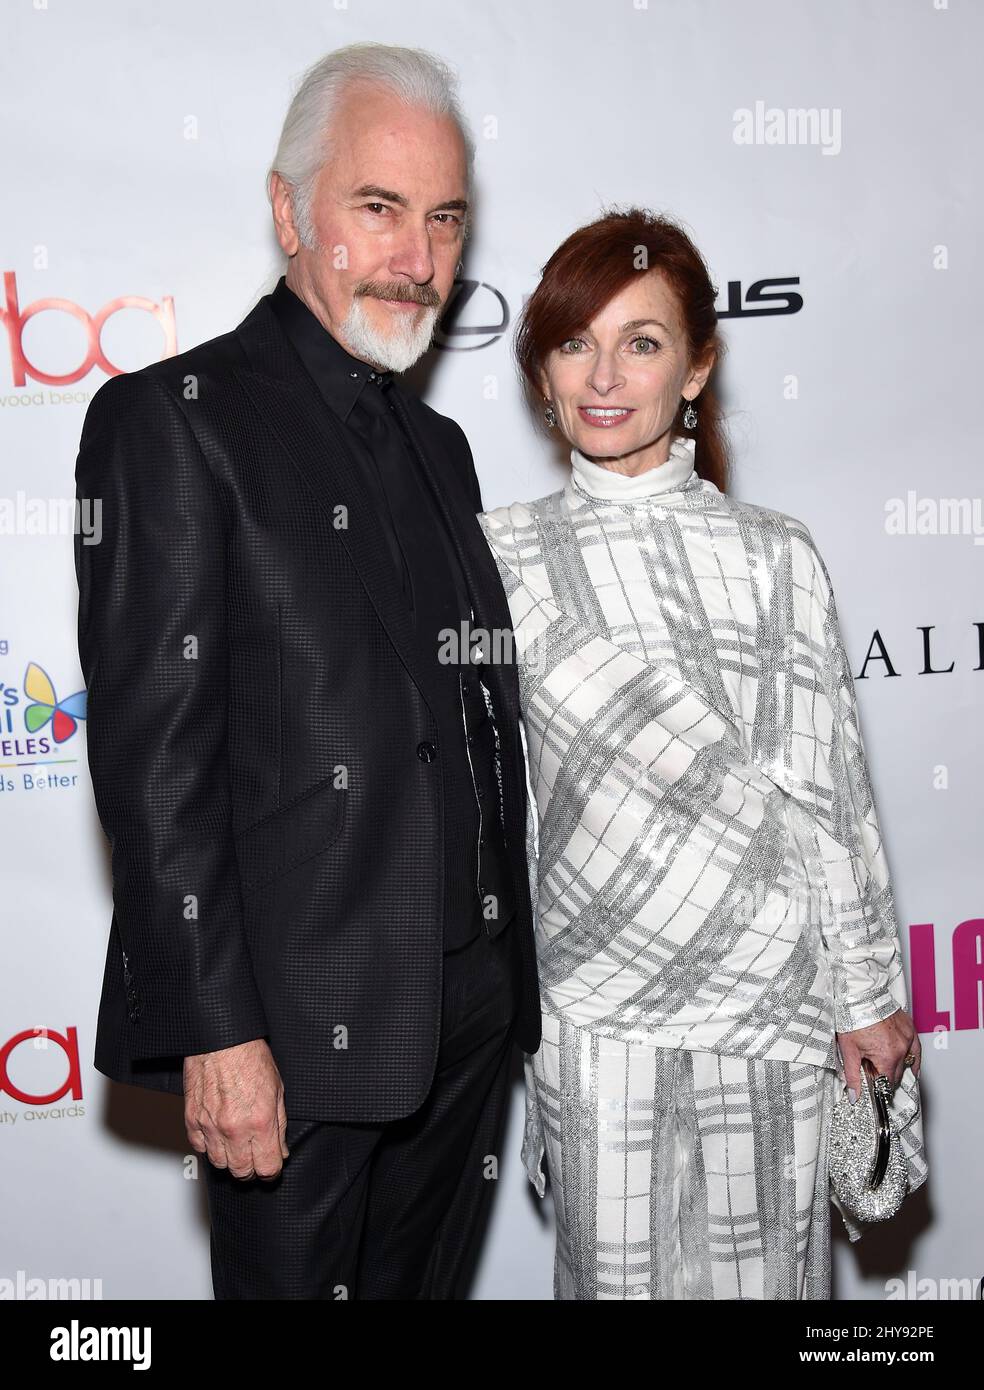 Rick Baker attending the 2nd Annual Hollywood Beauty Awards held at Avalon, Hollywood, Los Angeles. Stock Photo